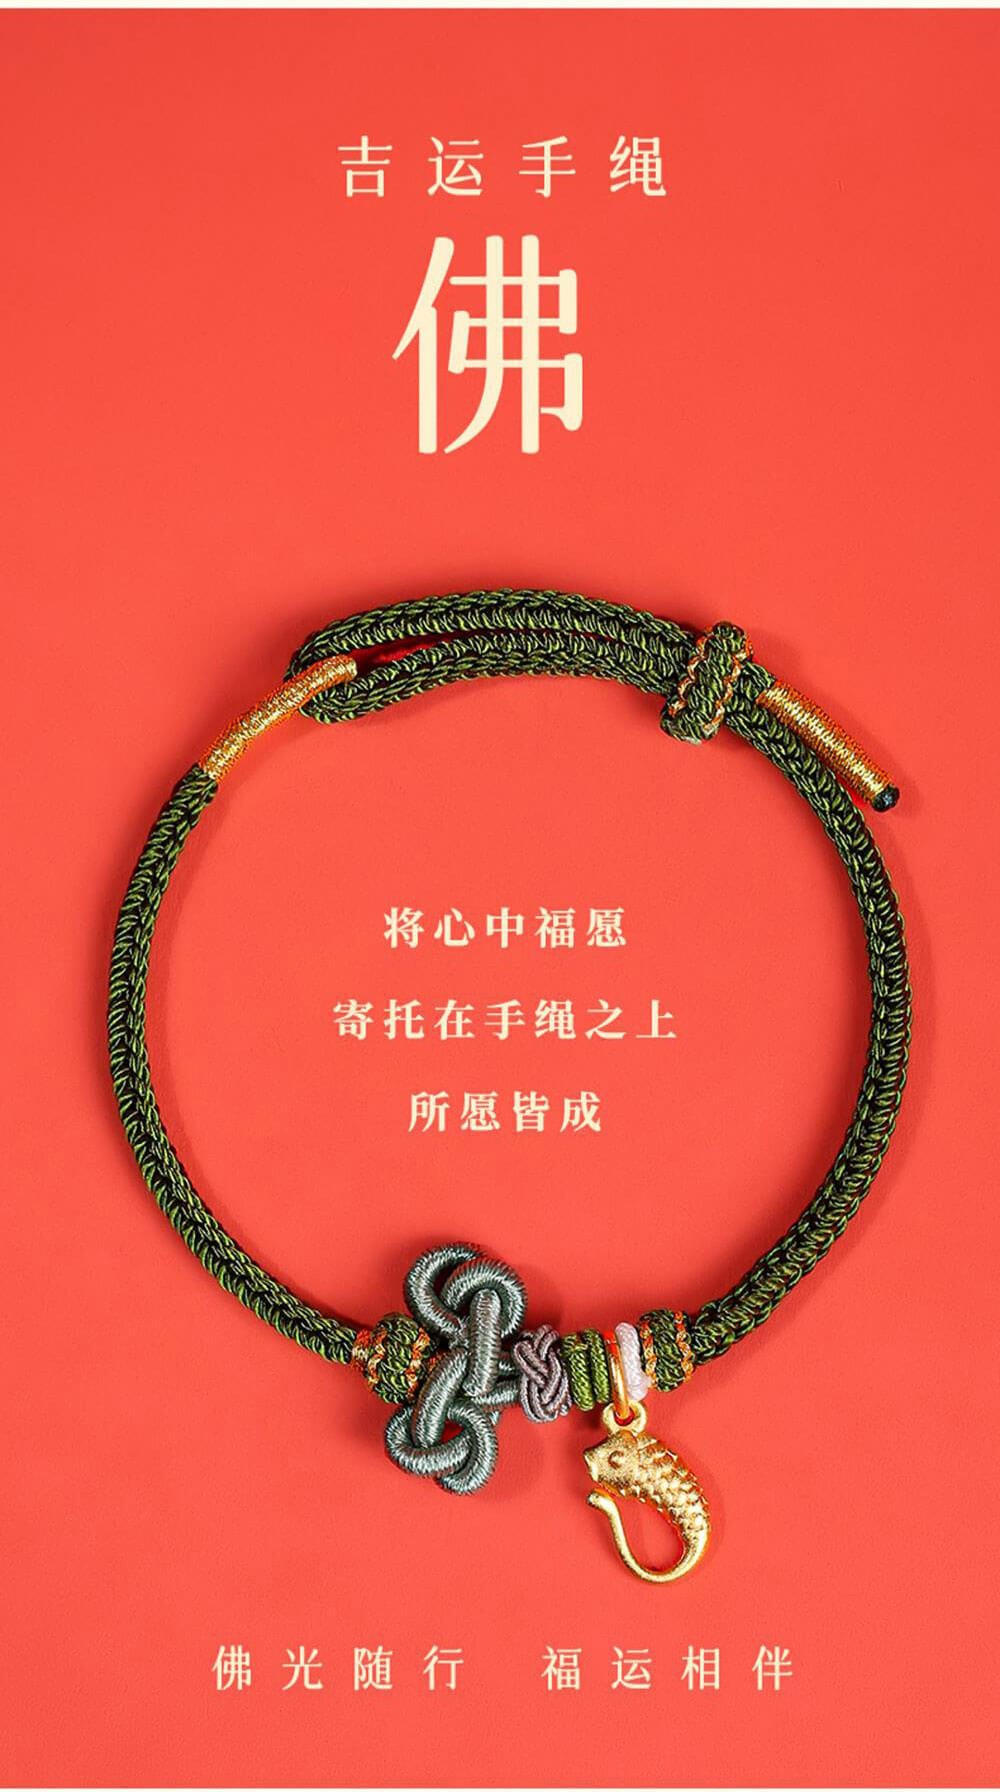 《Top of the Class》 Passing Exams with Flying Colors Ascended Koi Lucky Bracelet